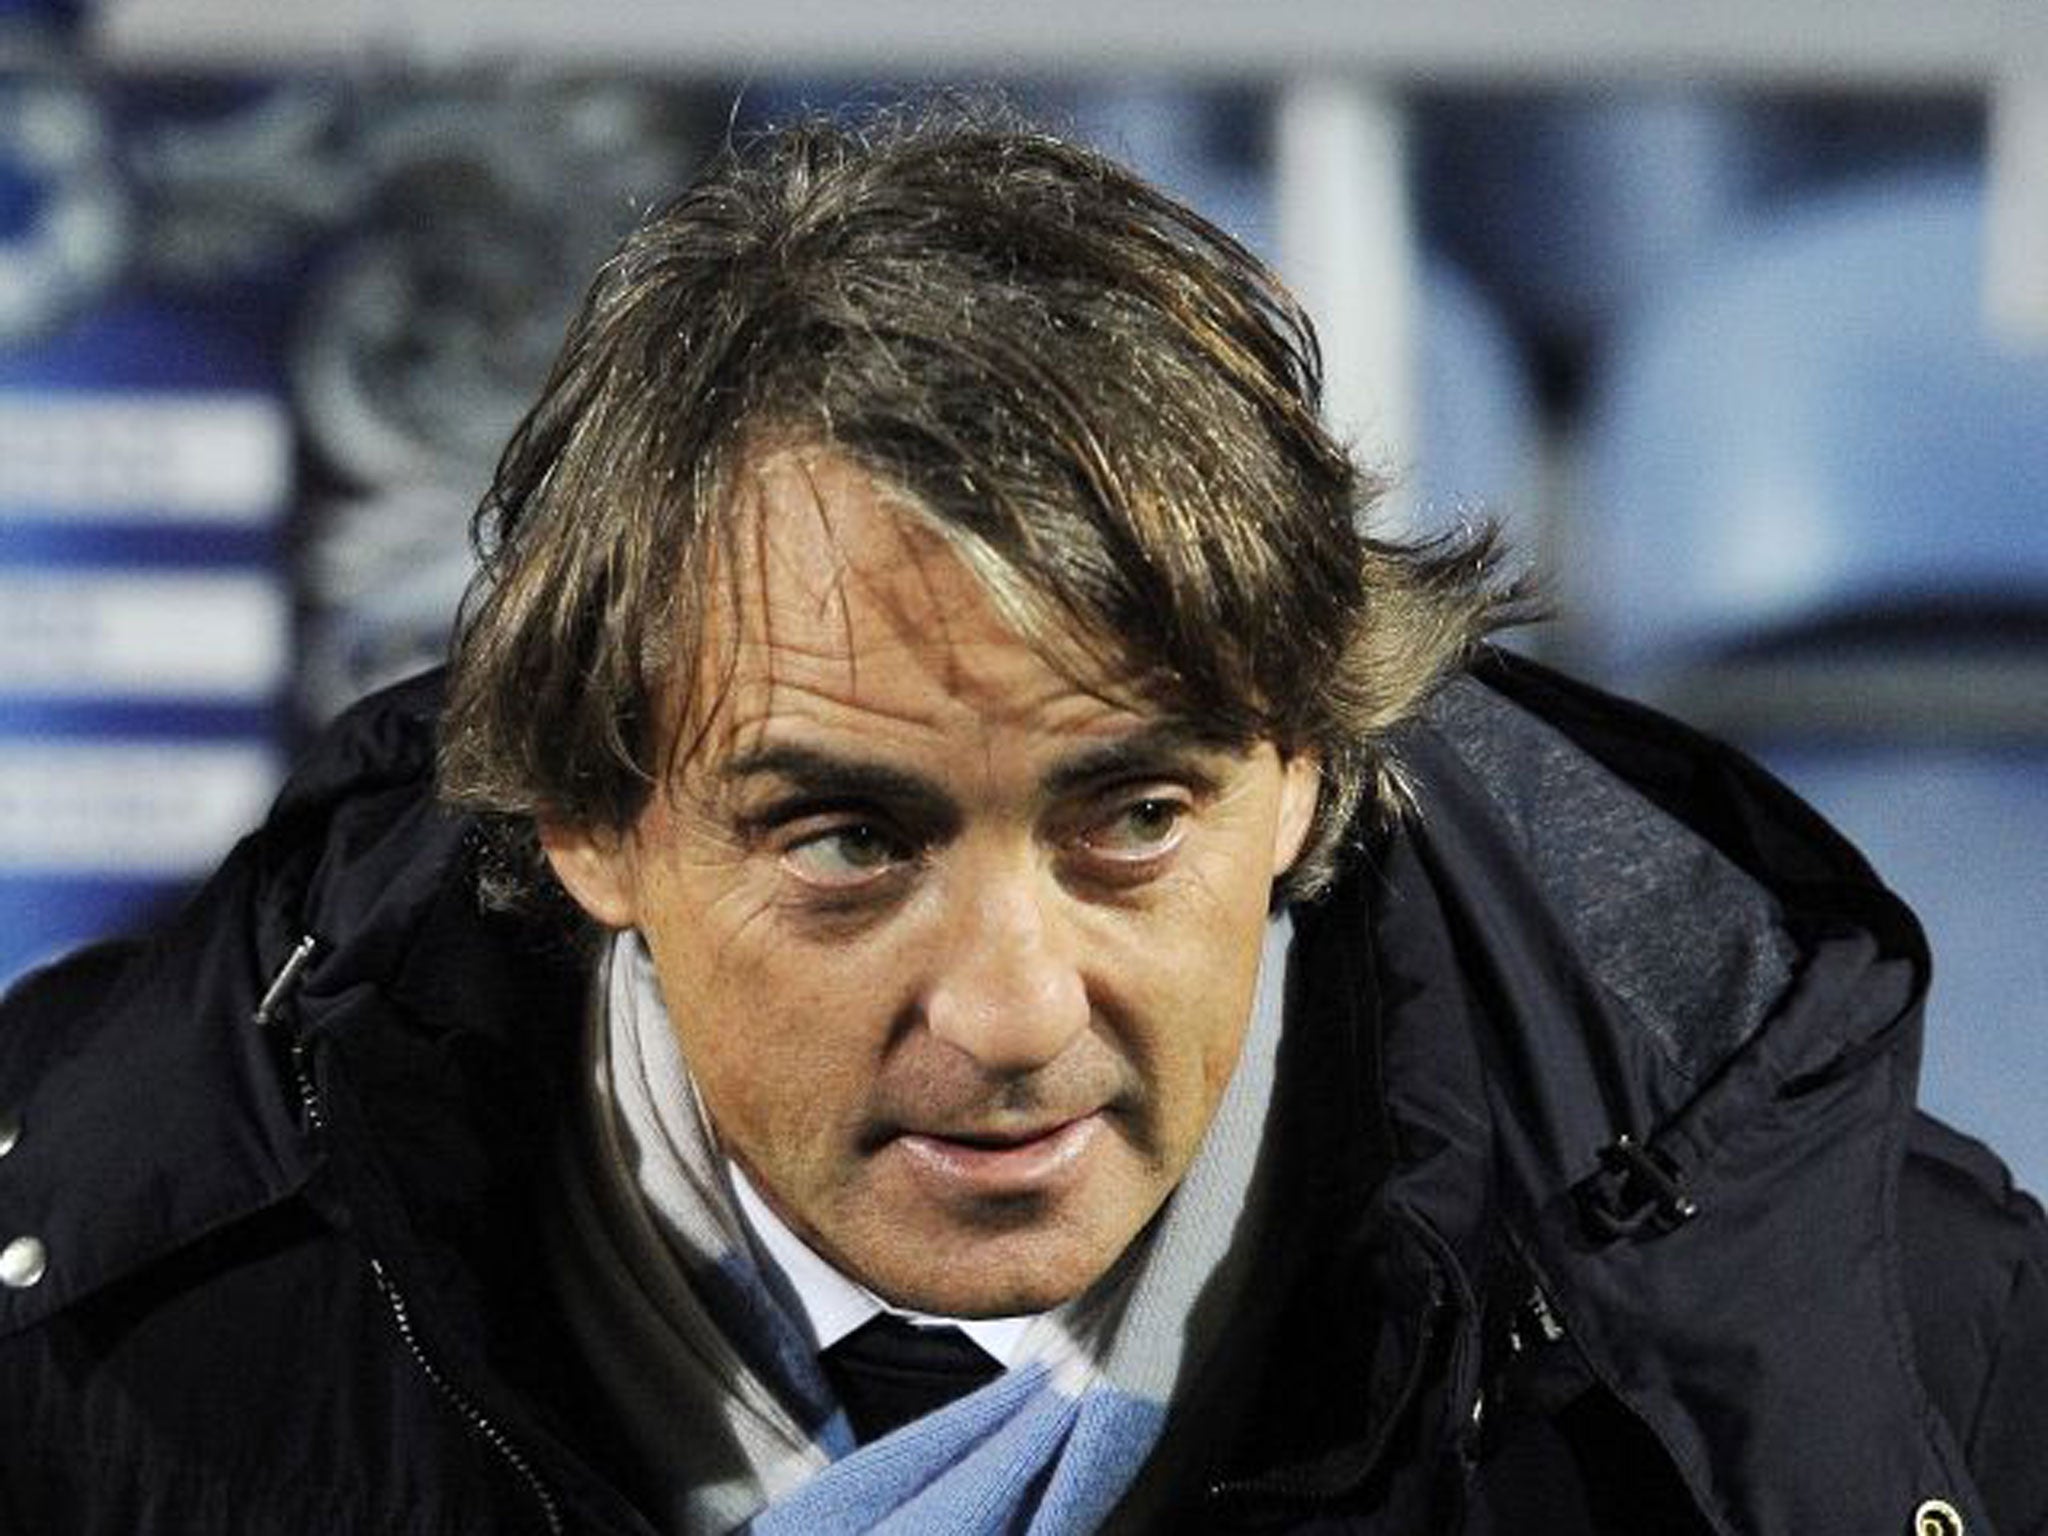 Roberto Mancini believes City will chase down United’s lead